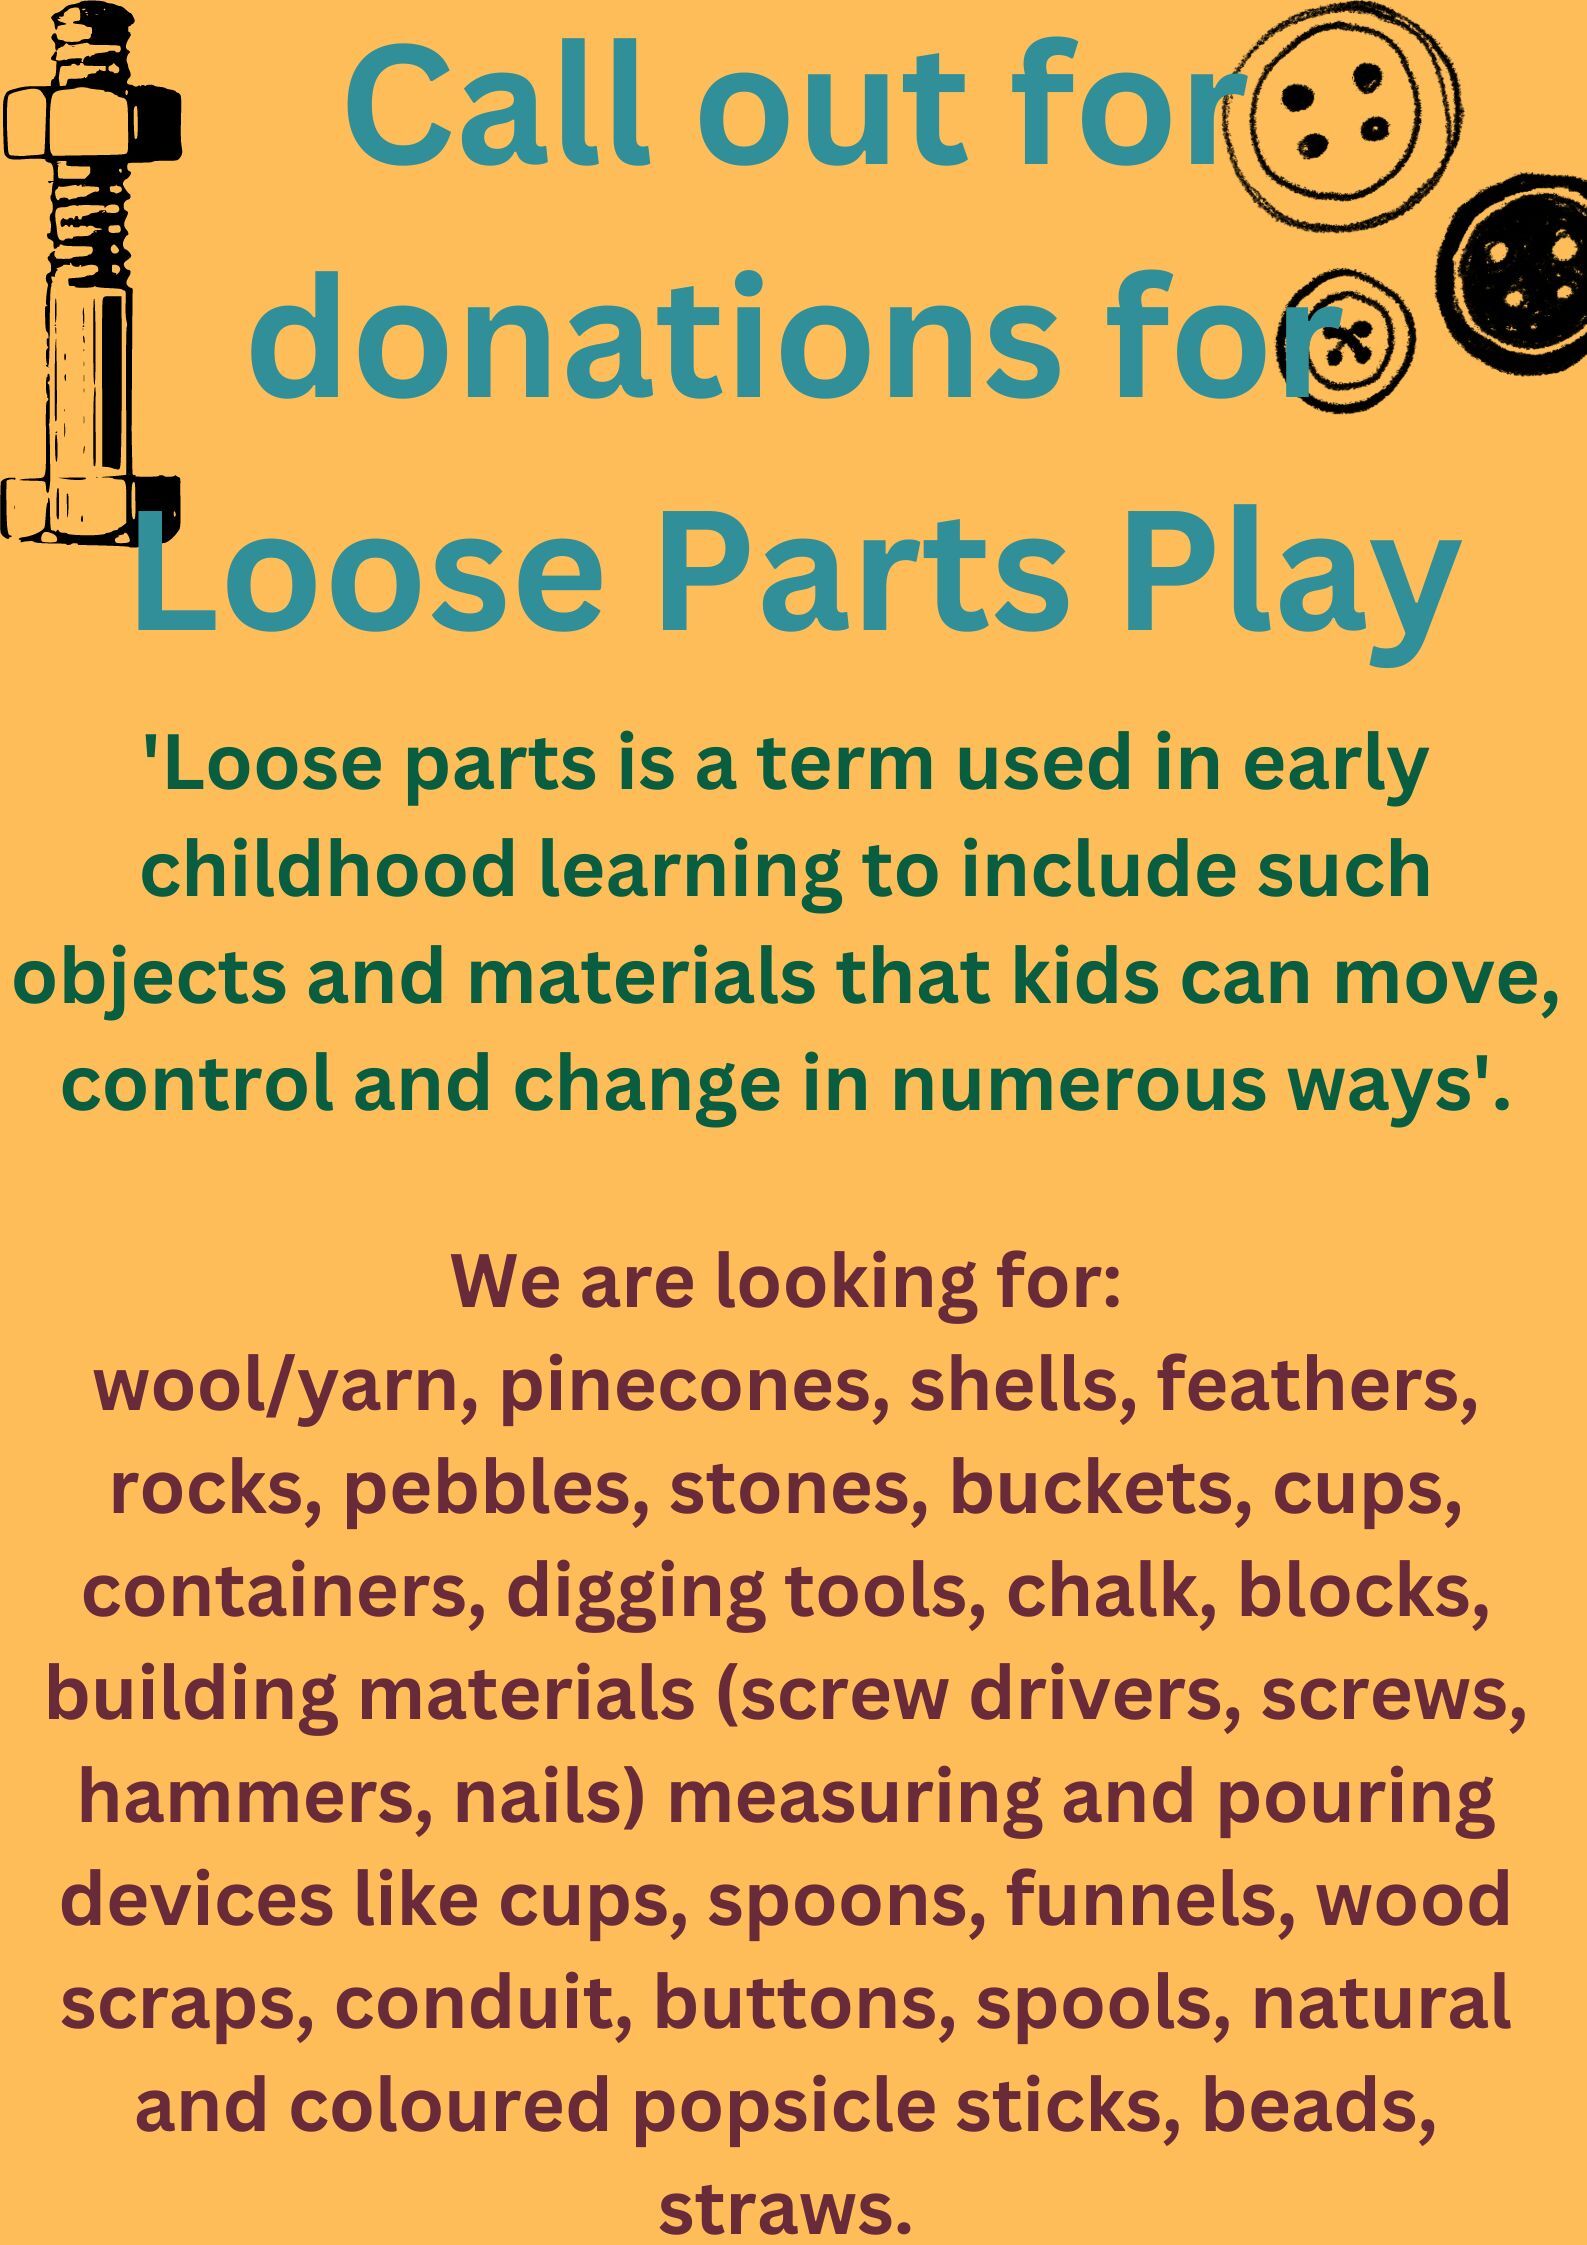 donations for loose parts play